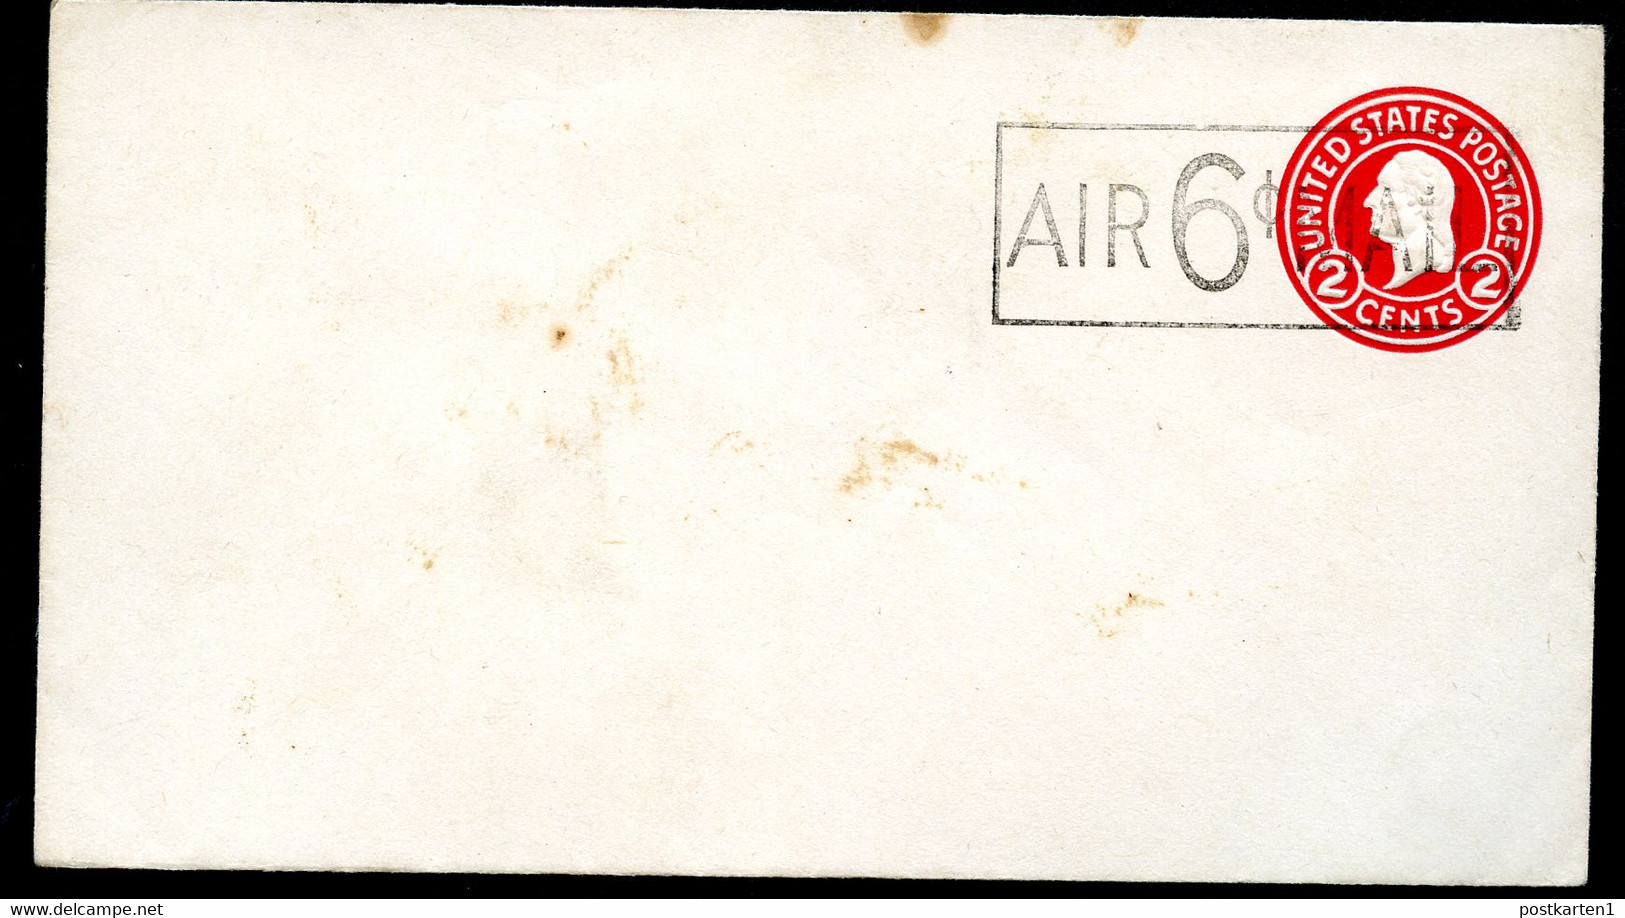 UC8 PSE Revalued Airmail Cover UPSS #33-39 Mint 1945 - 1941-60